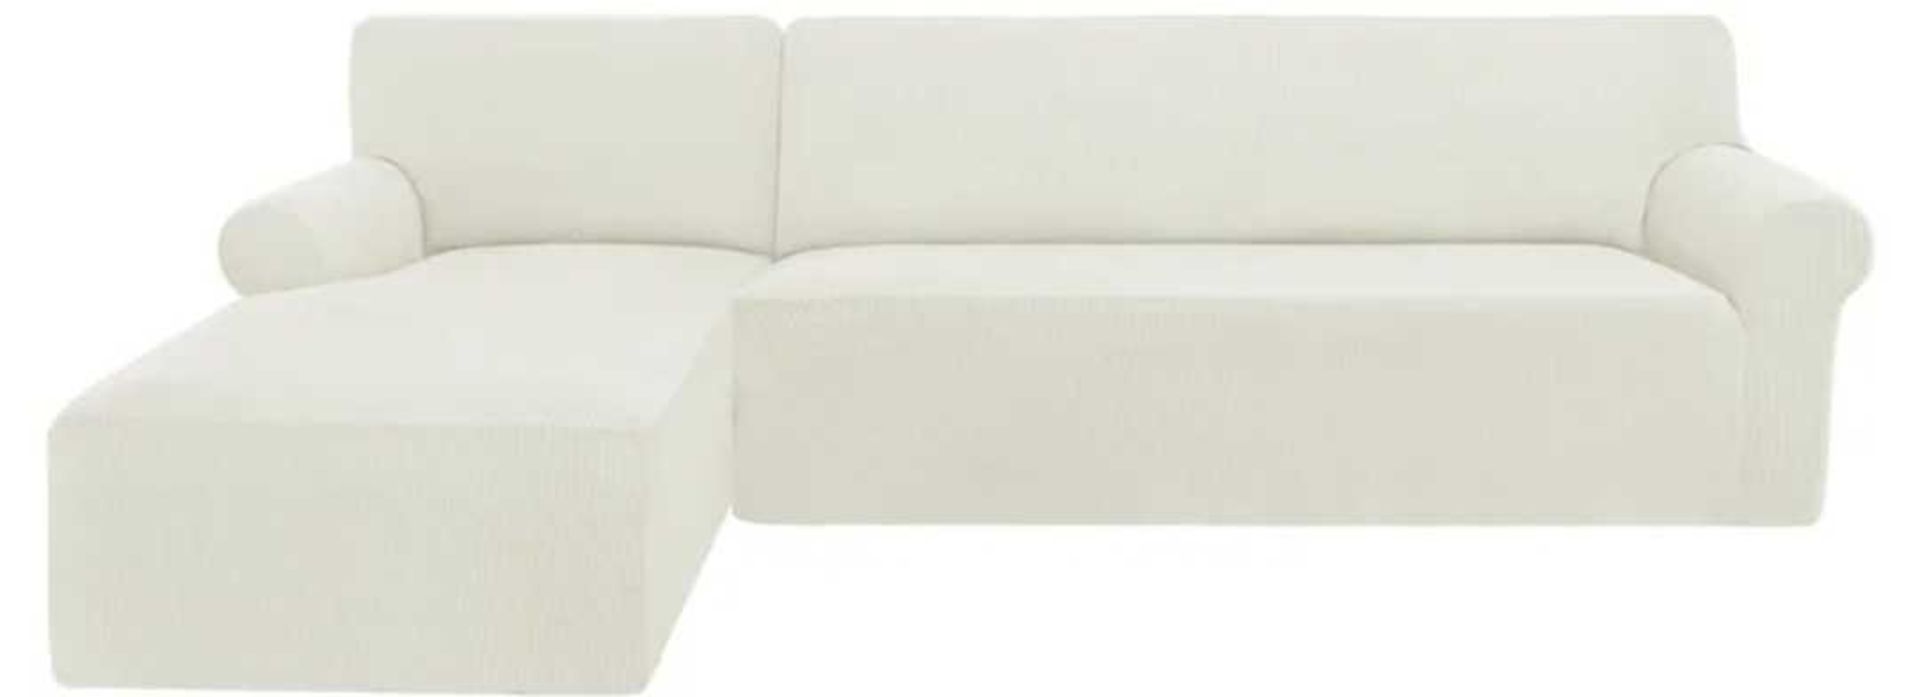 RRP £80 Baghed Subrtrex L Shaped Sofa Slipcover